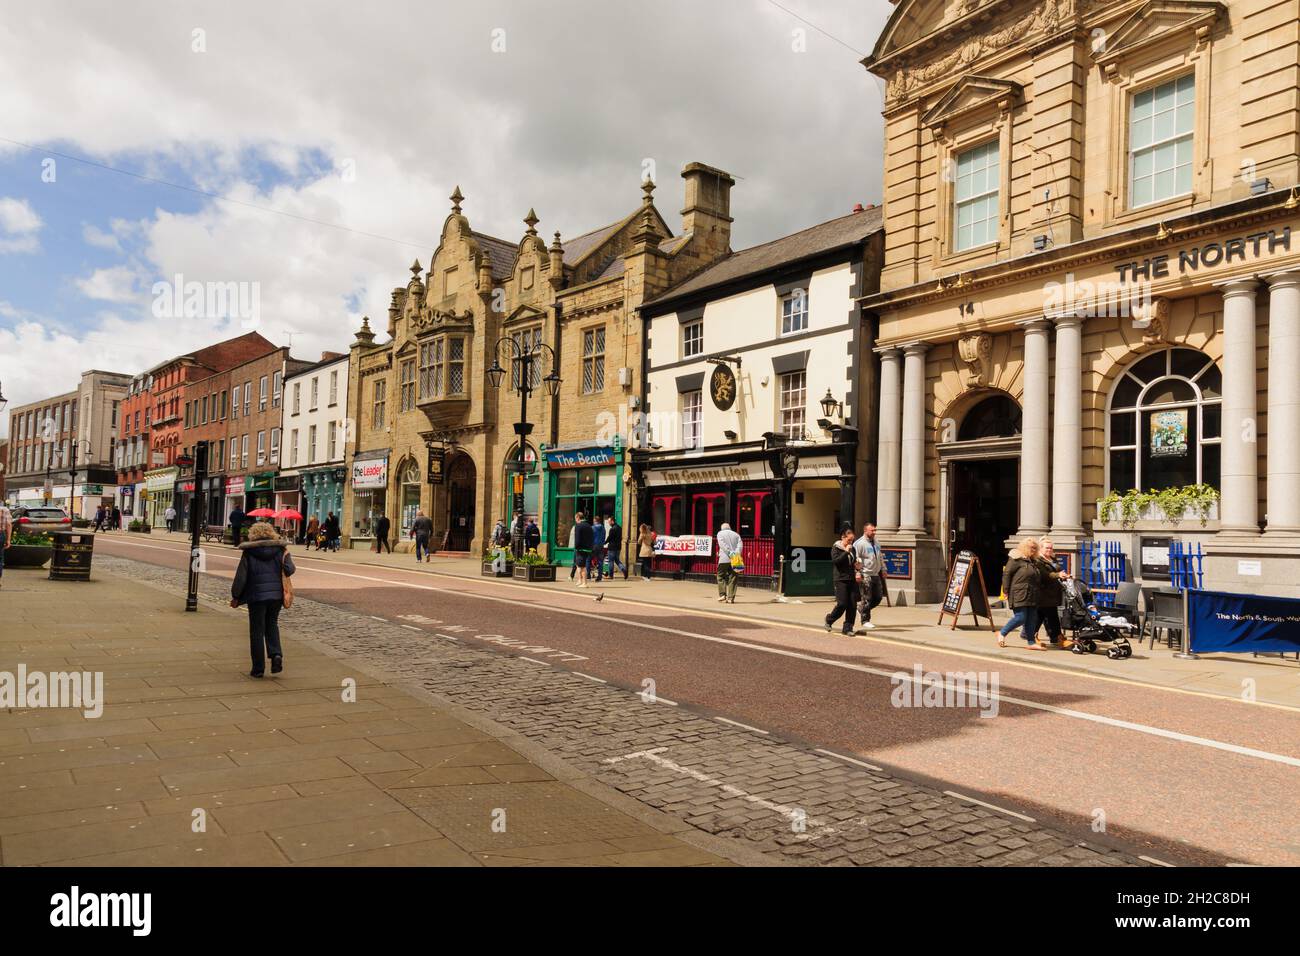 The High Street in Wrexham town centre showing it's many and varied period buildings Stock Photo